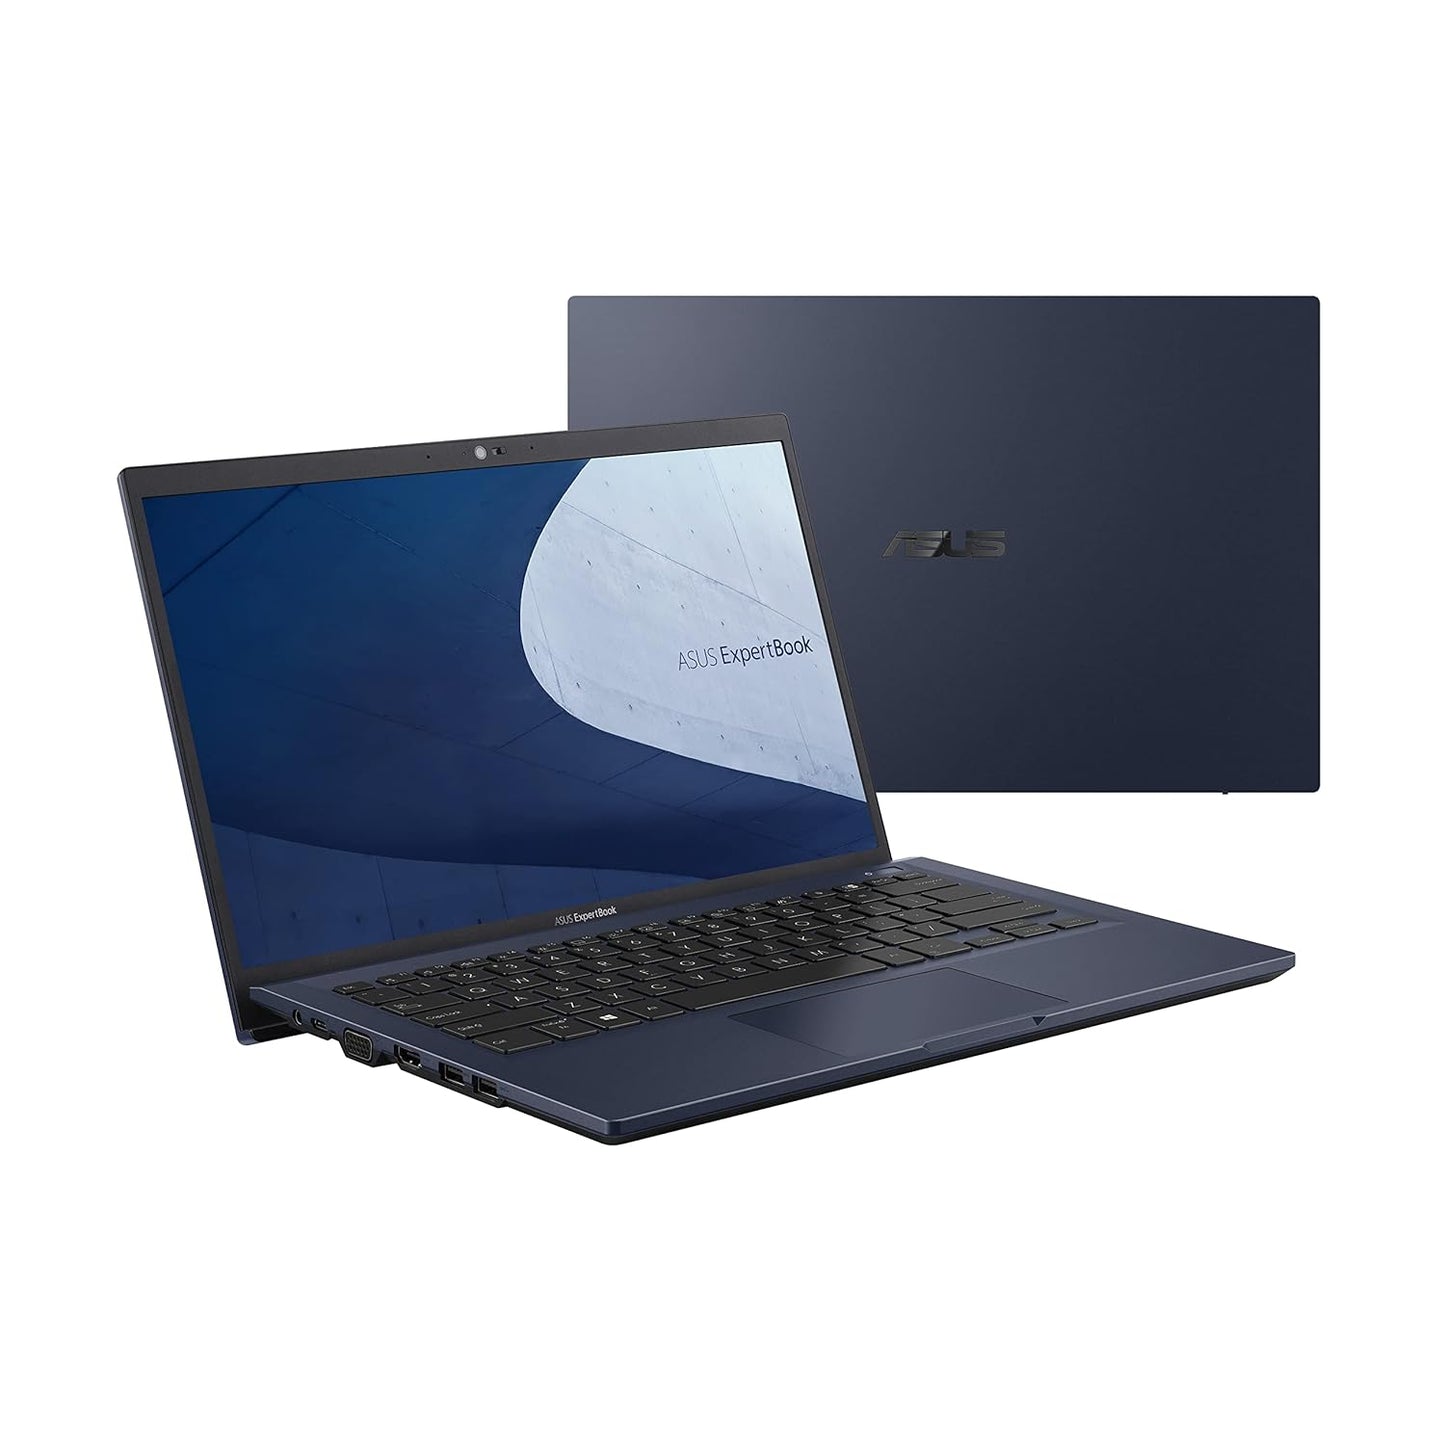 (Brand Refurbished) ASUS ExpertBook B1 Business Laptop, 14” FHD, Intel Core i5-1135G7, 512GB SSD, 8GB RAM, Military Grade Durable, AI Noise Cancelling, Webcam Privacy Shield, Win 10 Pro, Star Black, B1400CEAE-EK4627X